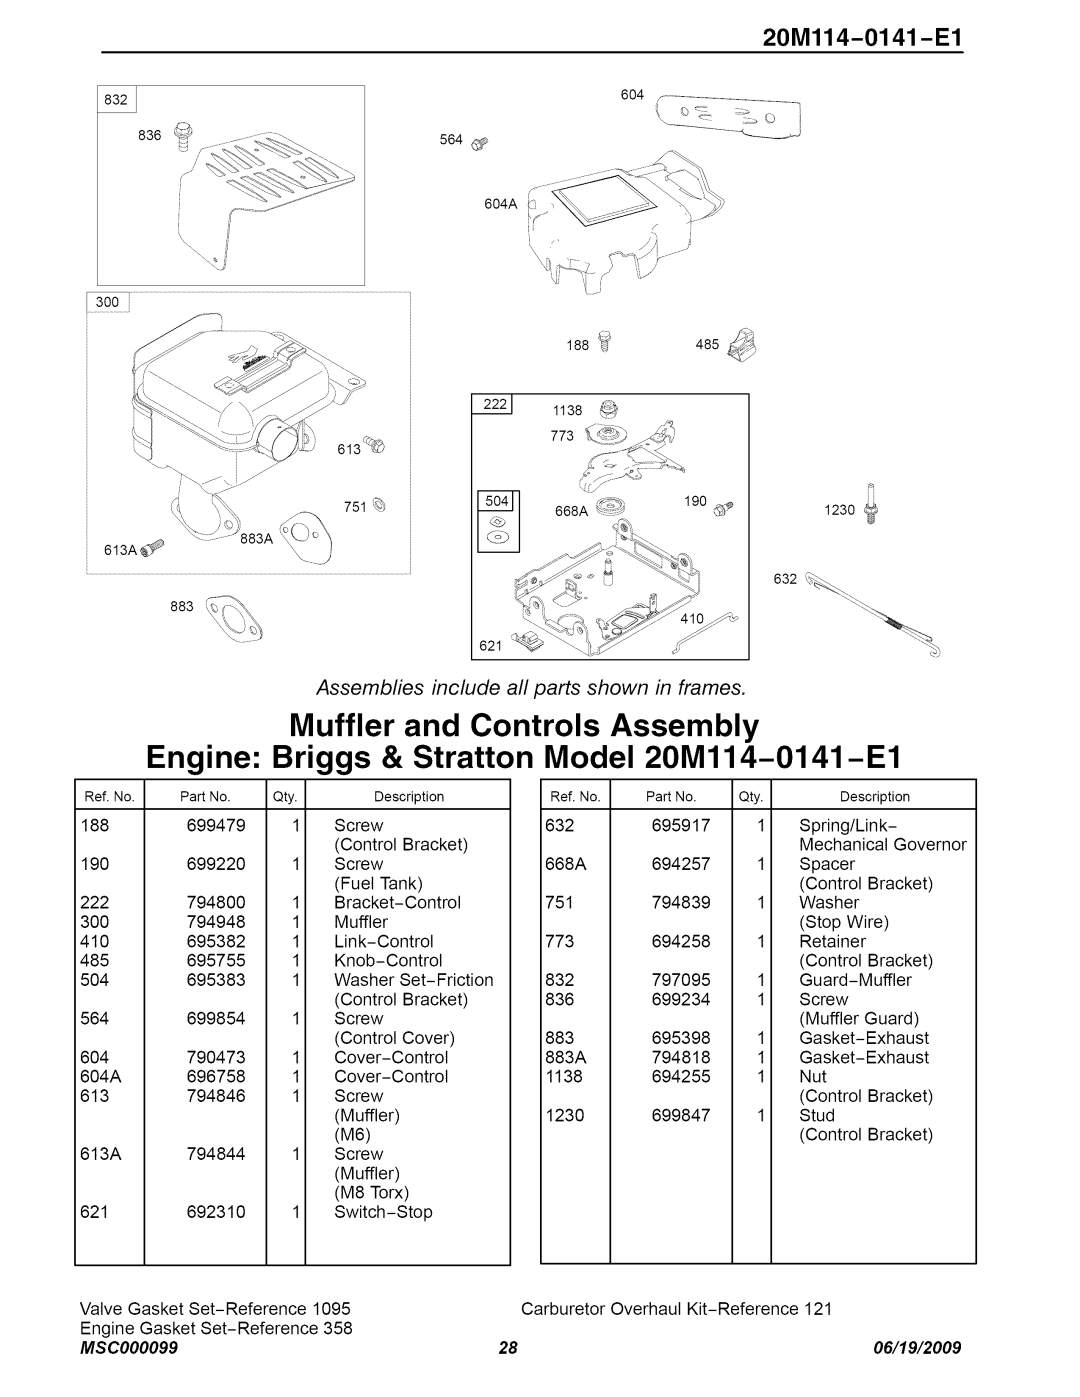 Craftsman C950-52943-0 20Ml14-0141 -El, Assemblies include all parts shown in frames, 699479, MSC000099, 06/19/2009 